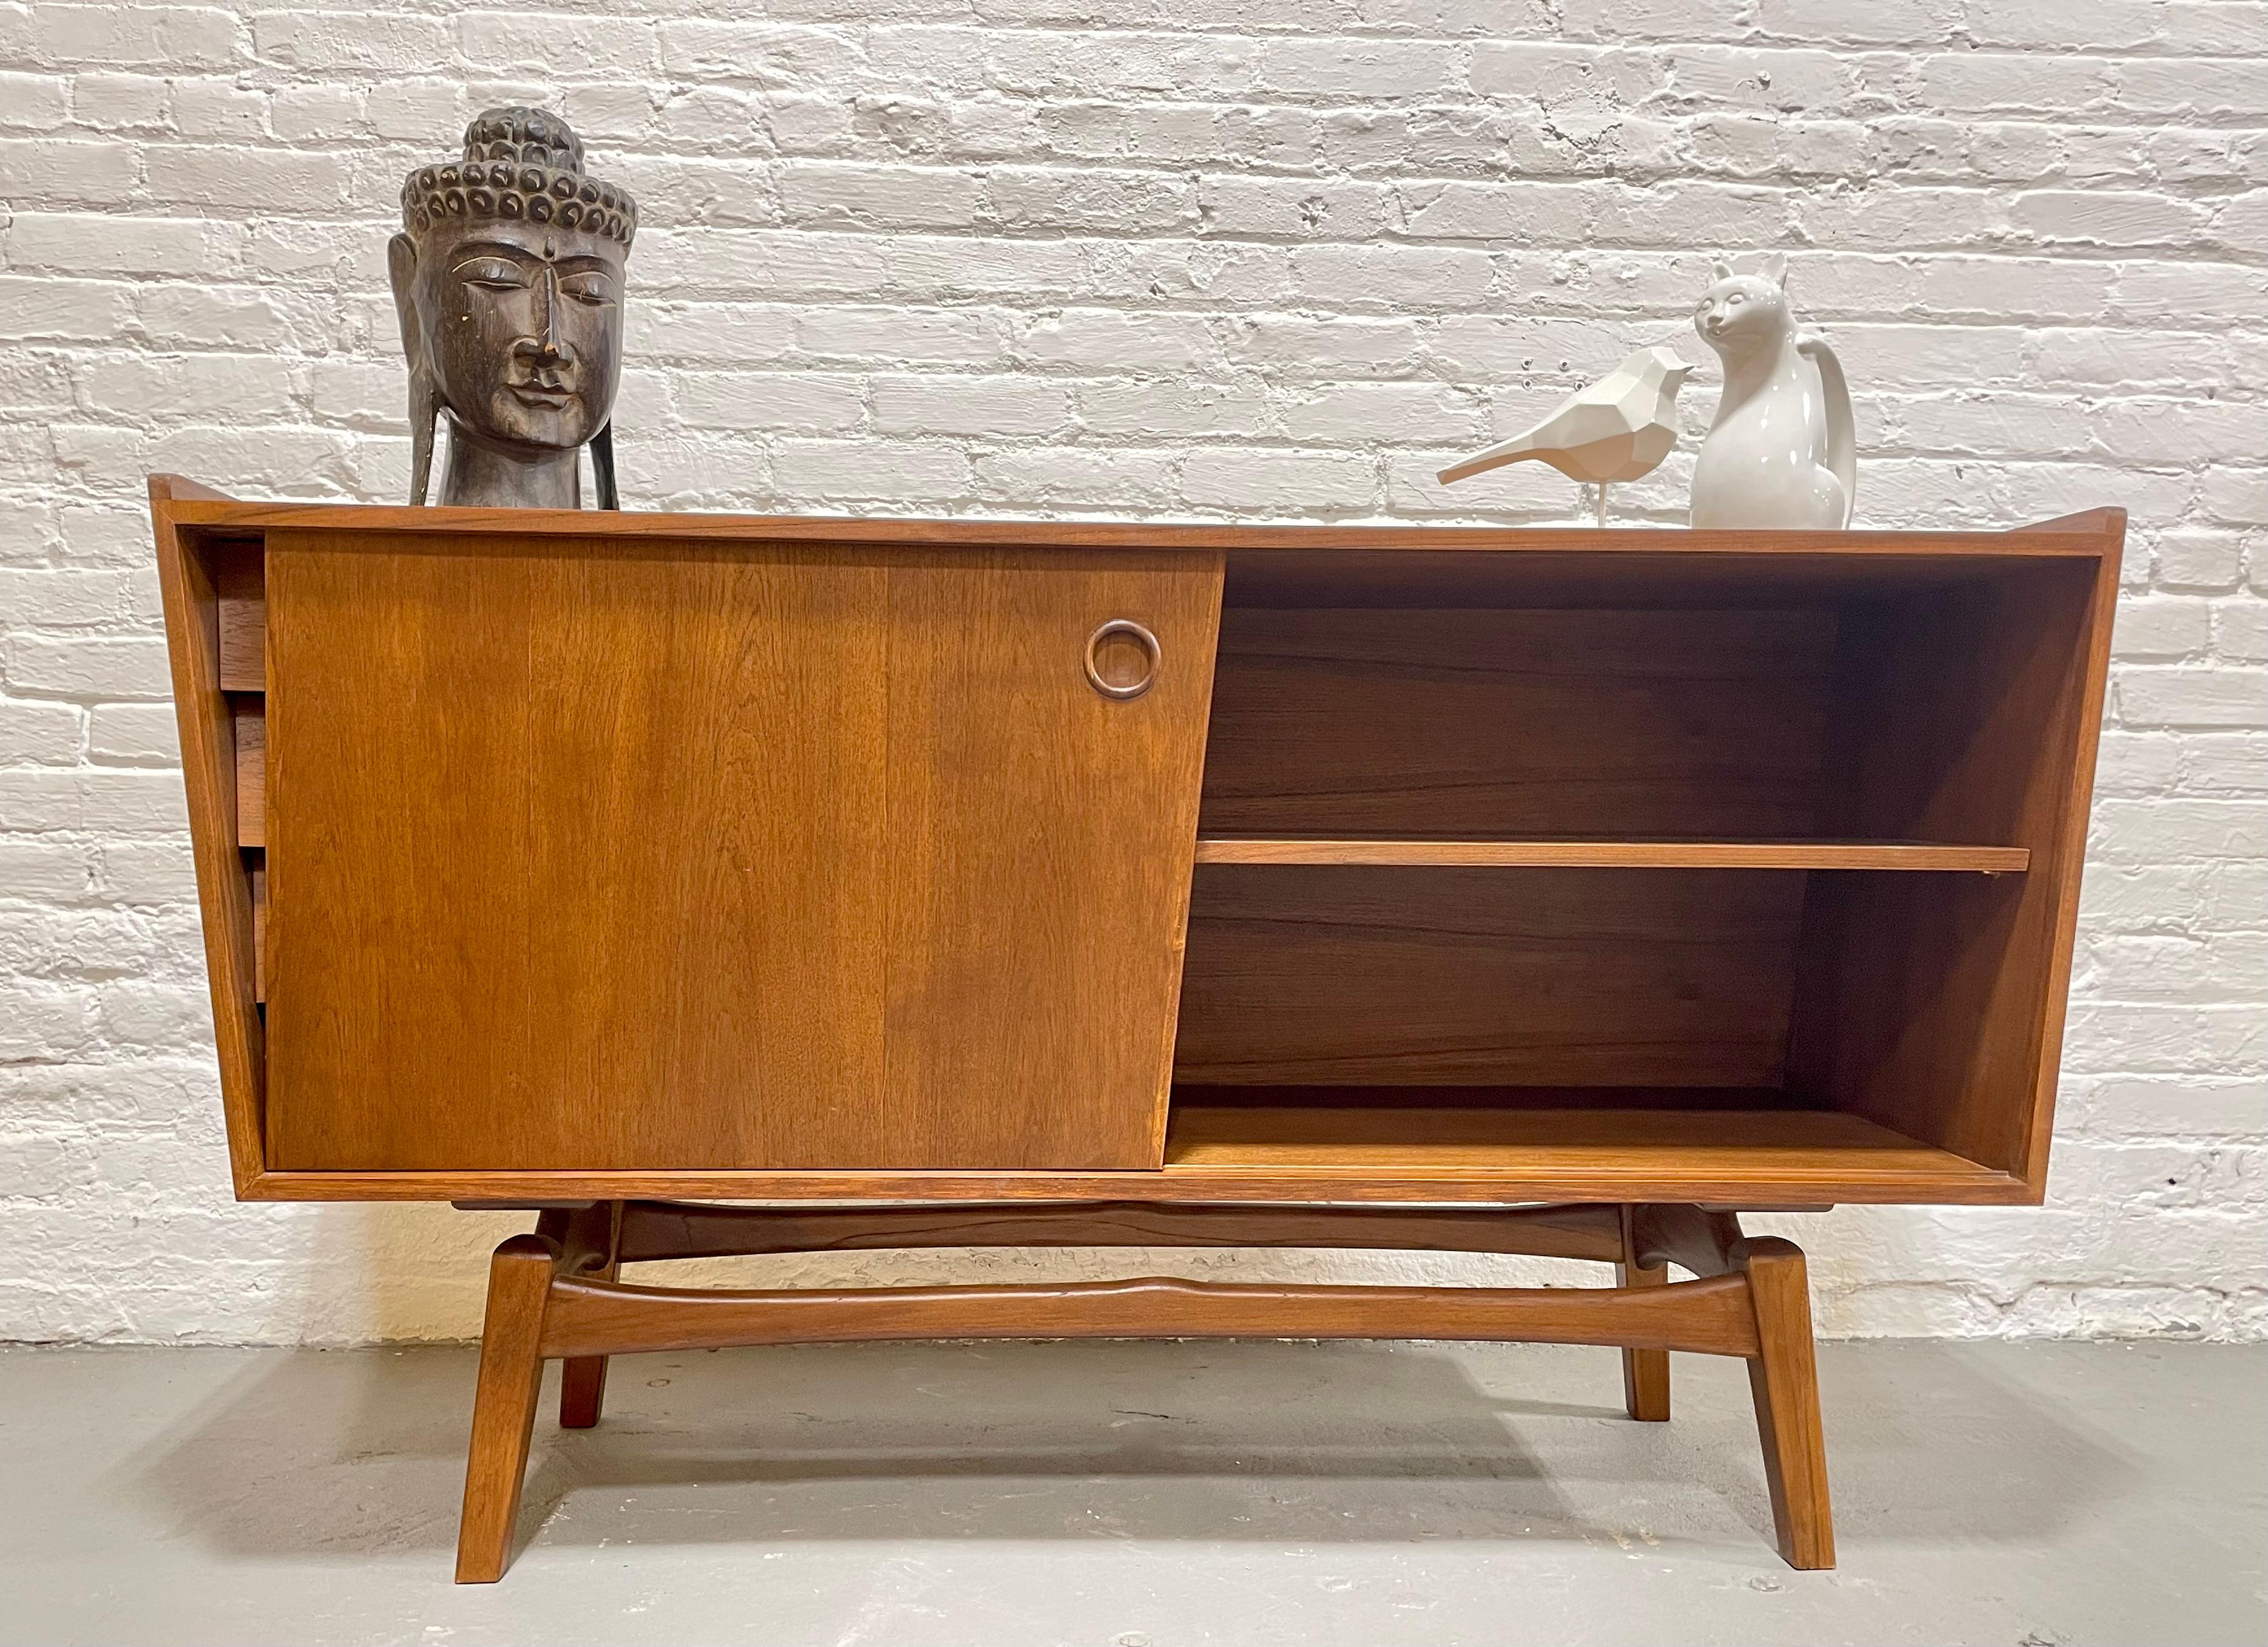 Apartment Sized Mid-Century Modern Styled Floating Teak Credenza / Sideboard For Sale 1